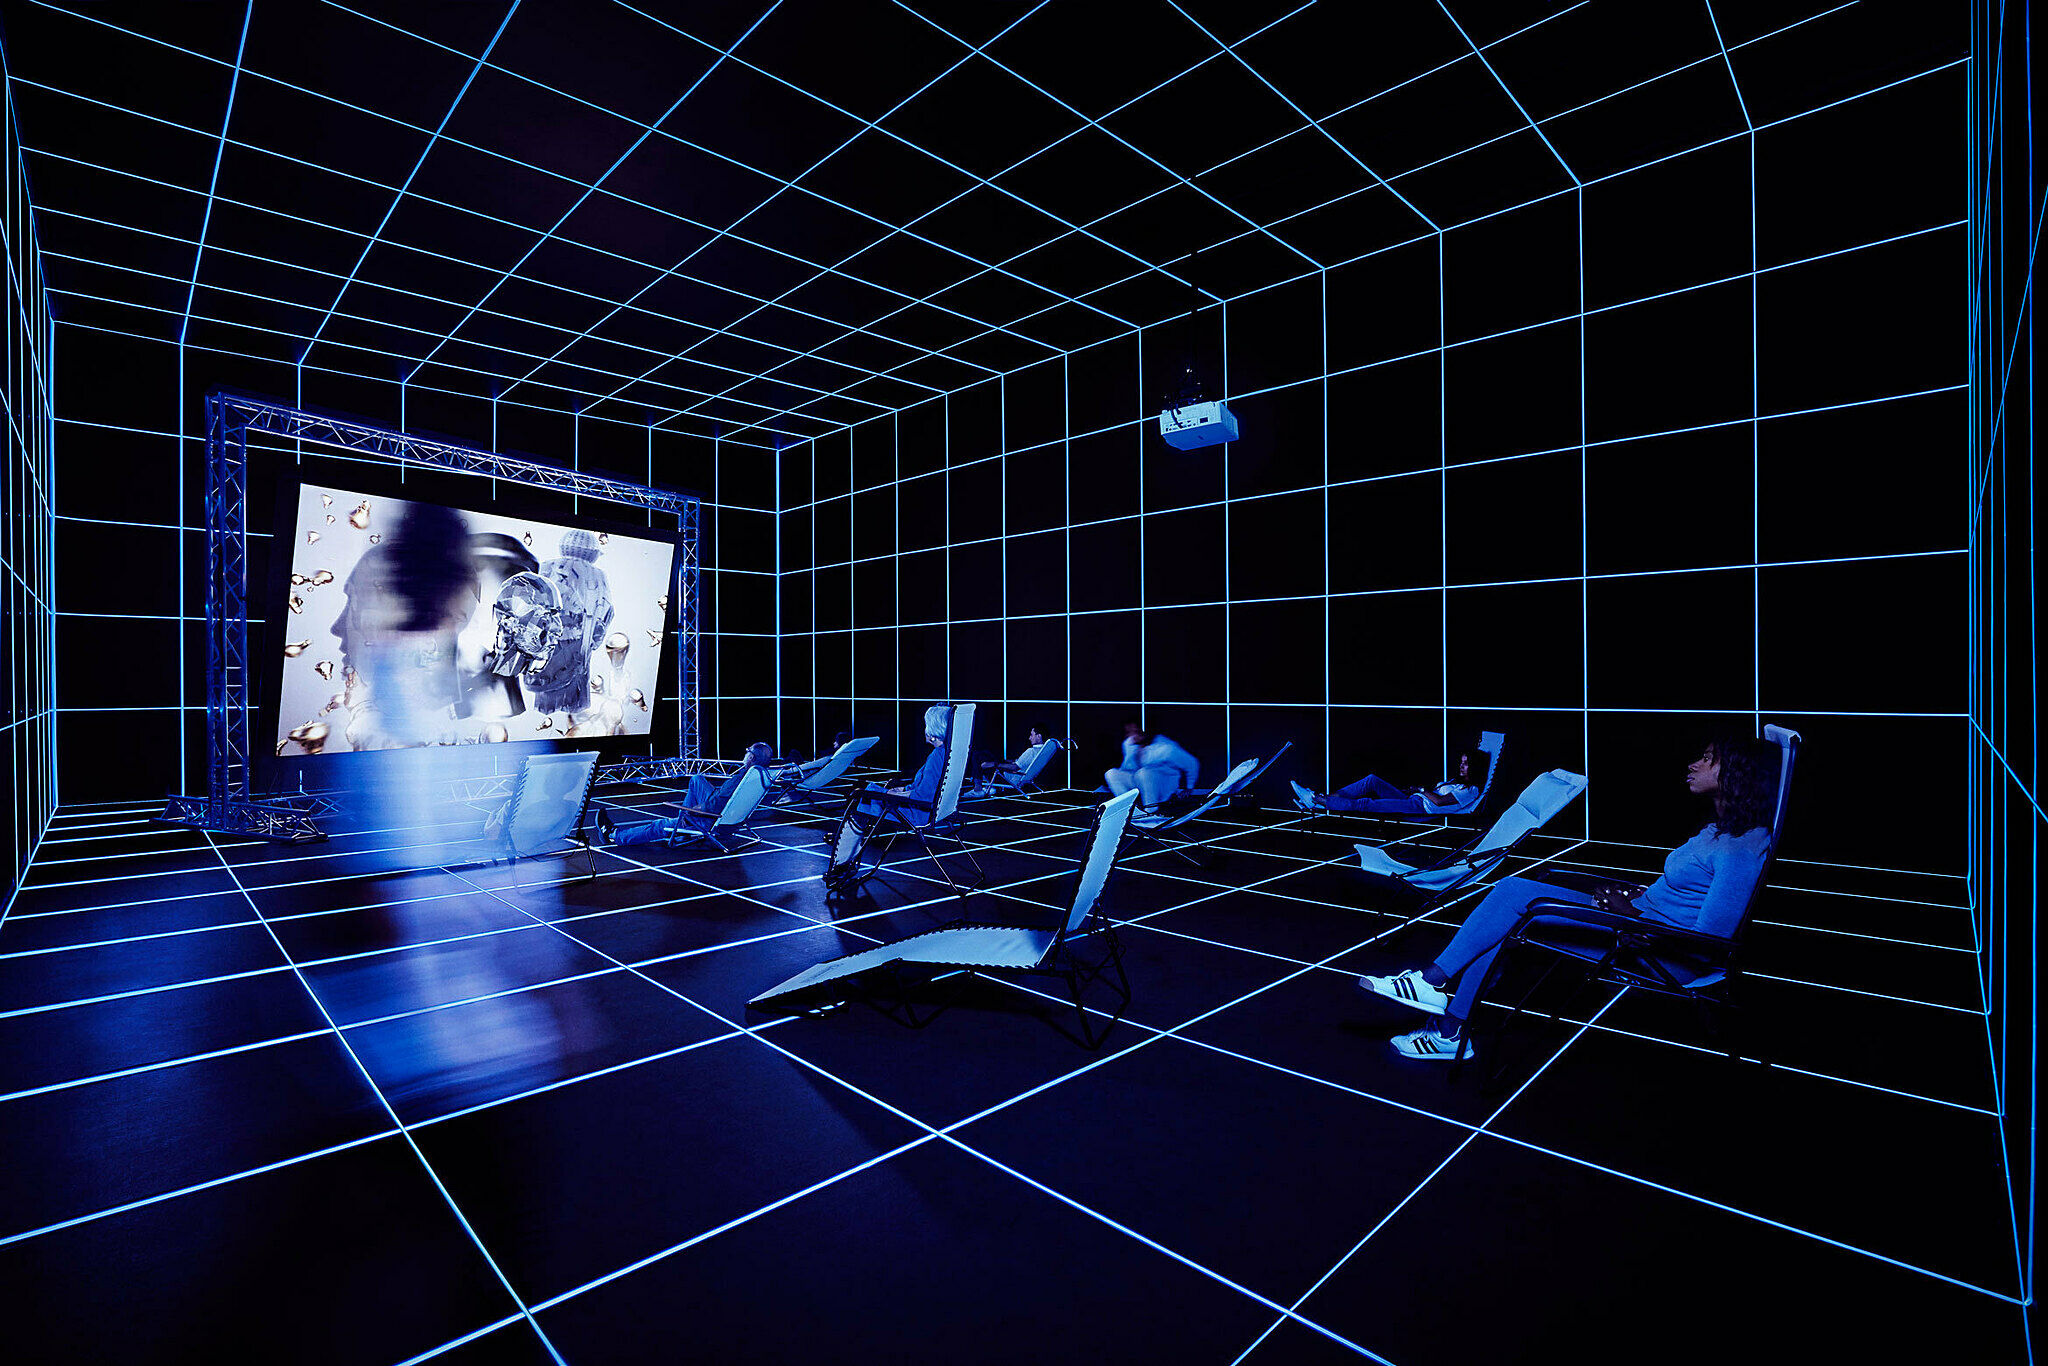 An immersive video installation by artist Hito Steyerl.